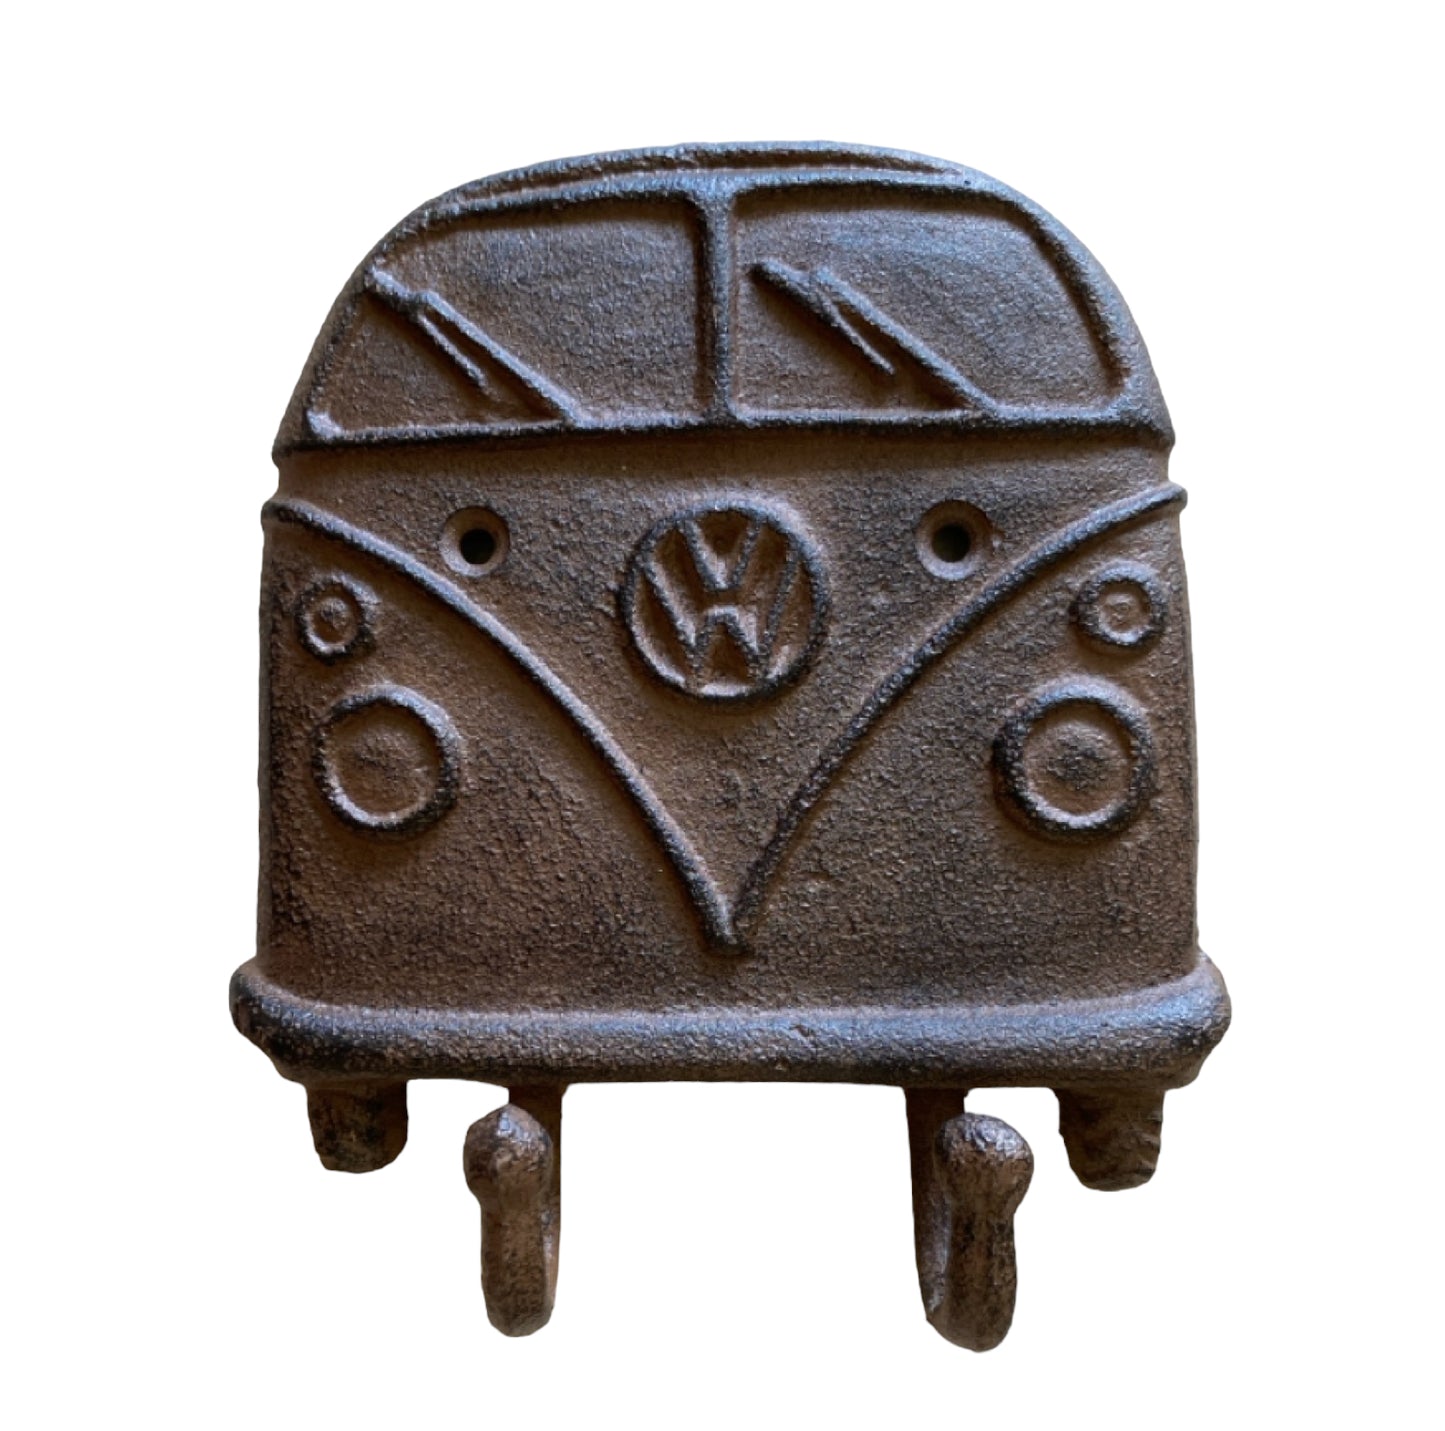 Kombi VW Hook Rustic Cast Iron - The Renmy Store Homewares & Gifts 